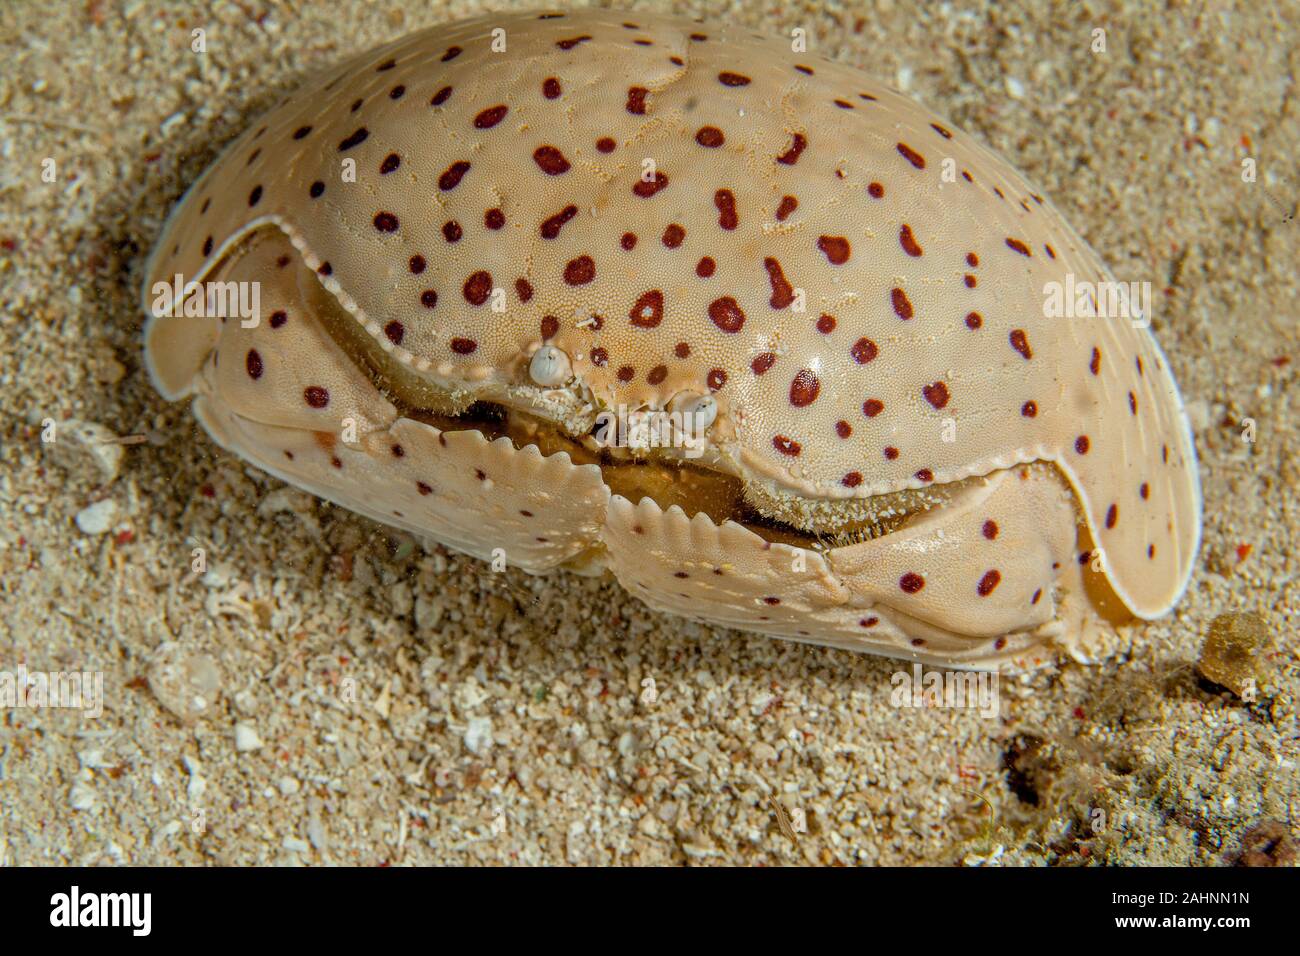 Calappa calappa, also known as the smooth or red-spotted box crab Stock Photo